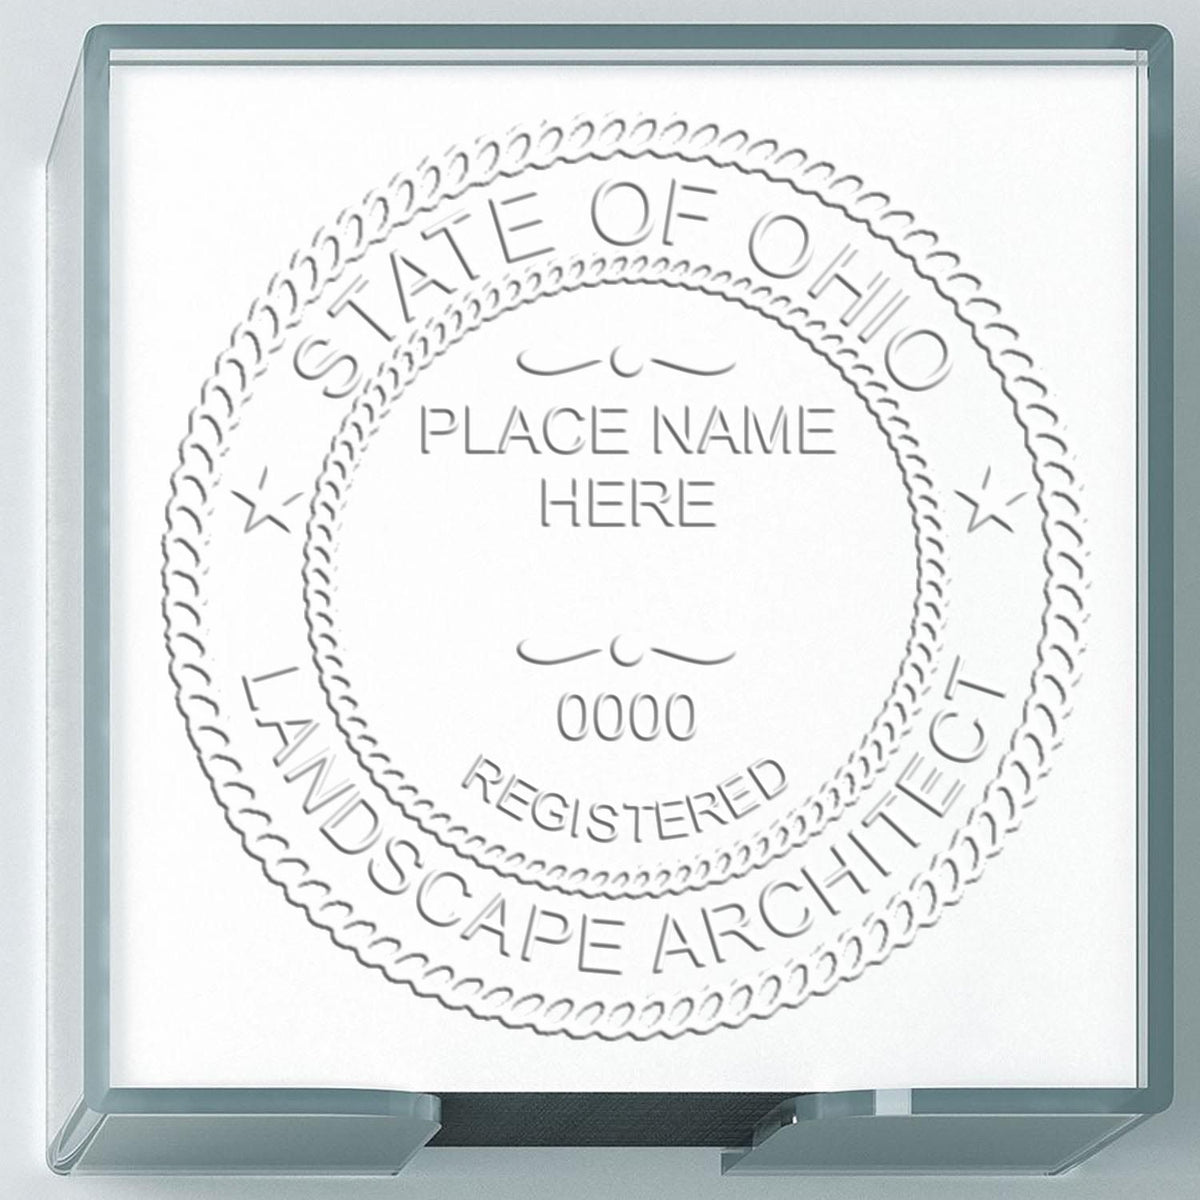 The Gift Ohio Landscape Architect Seal stamp impression comes to life with a crisp, detailed image stamped on paper - showcasing true professional quality.